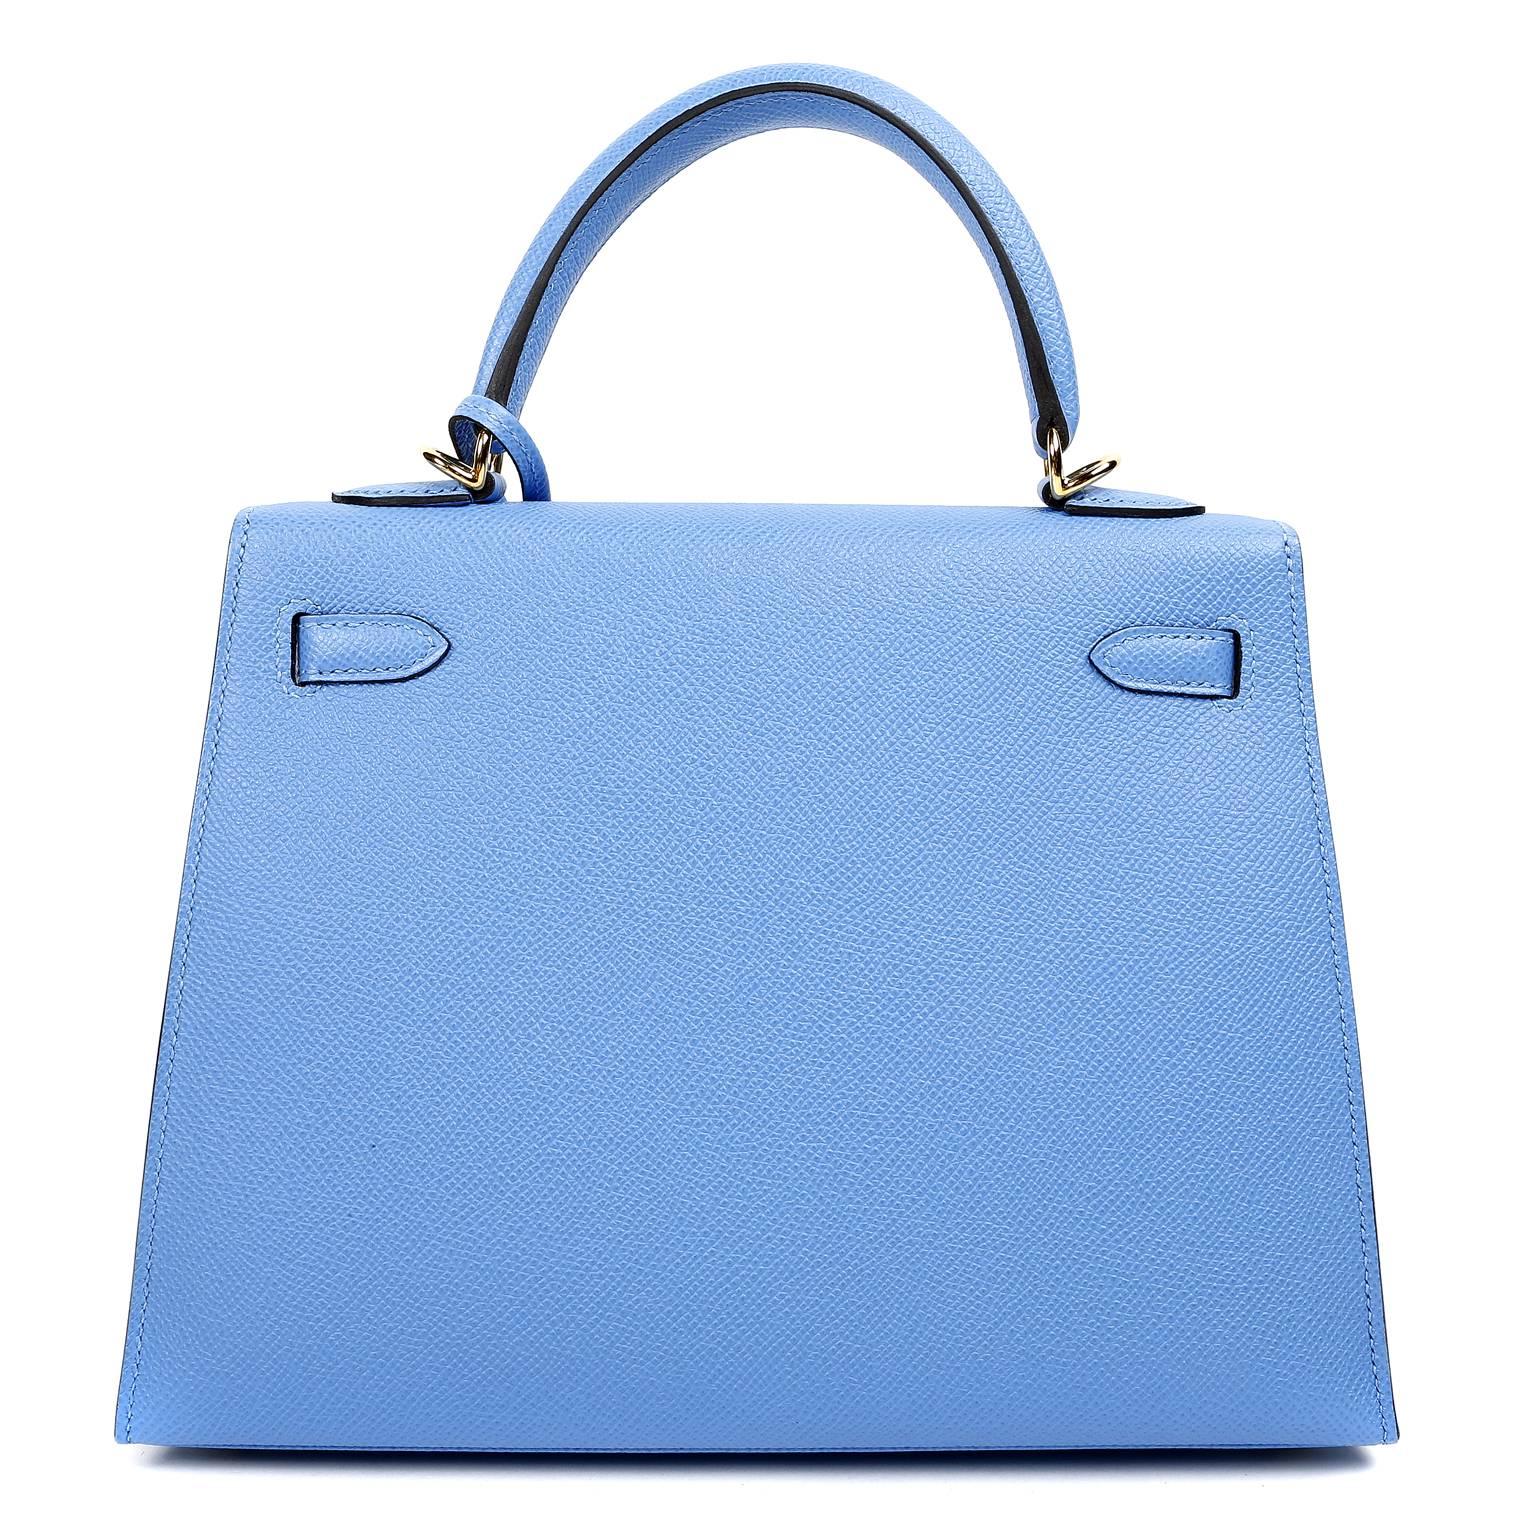 Hermès Bleu Paradis Epsom 25 cm Kelly Sellier is in pristine unworn condition.   Store fresh, the protective plastic is intact on the hardware.
  Hermès bags are considered the ultimate luxury item worldwide.  Each piece is handcrafted with